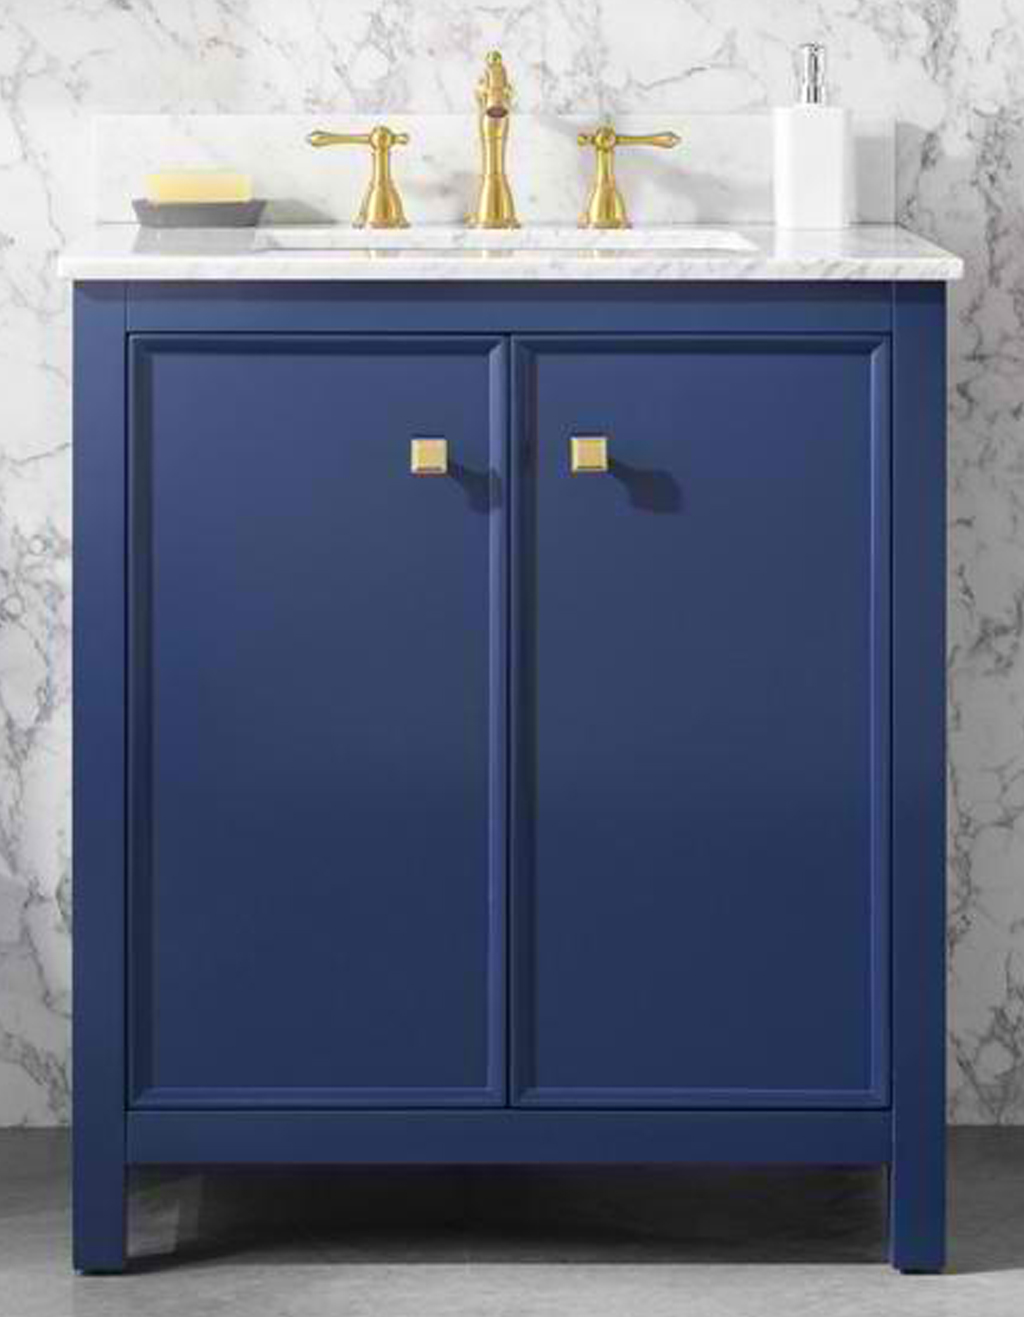 30" Blue Finish Sink Vanity Cabinet with Carrara White Top and Color Options